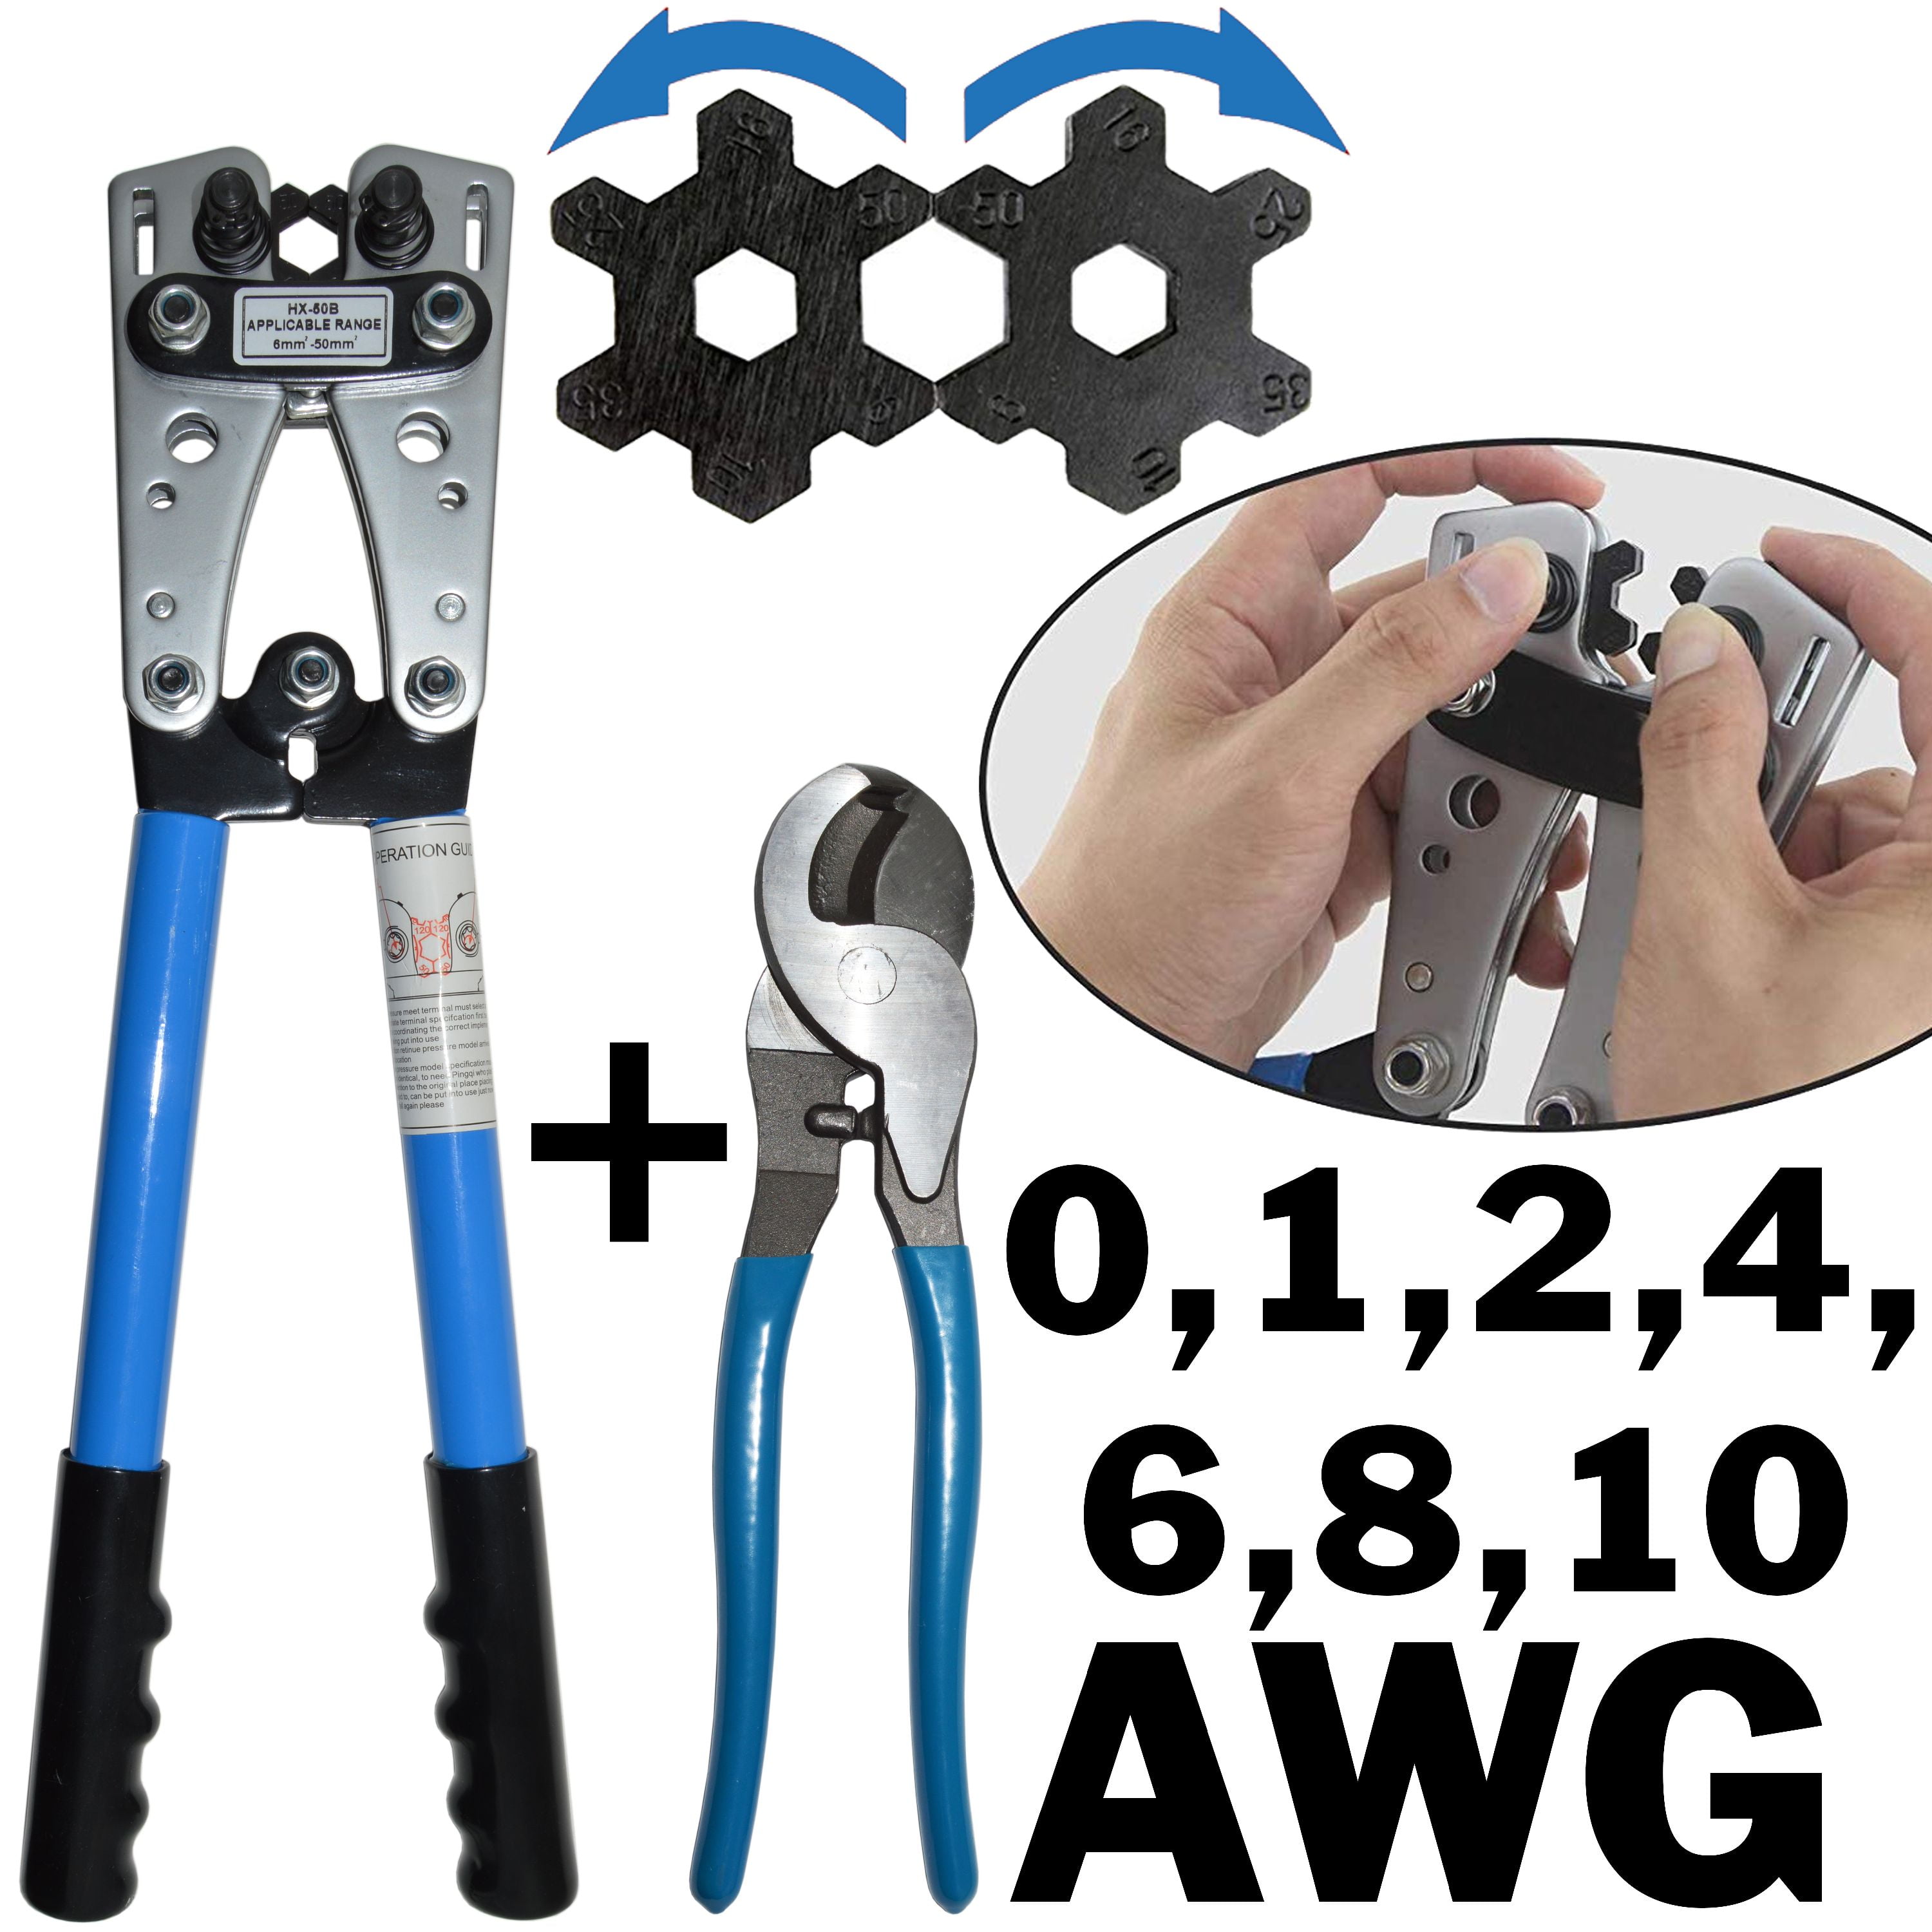 6,4 2 and 1/0 AWG Wire high quality New 8 Wire Crimper Tools kit 2 Pcs for 10 